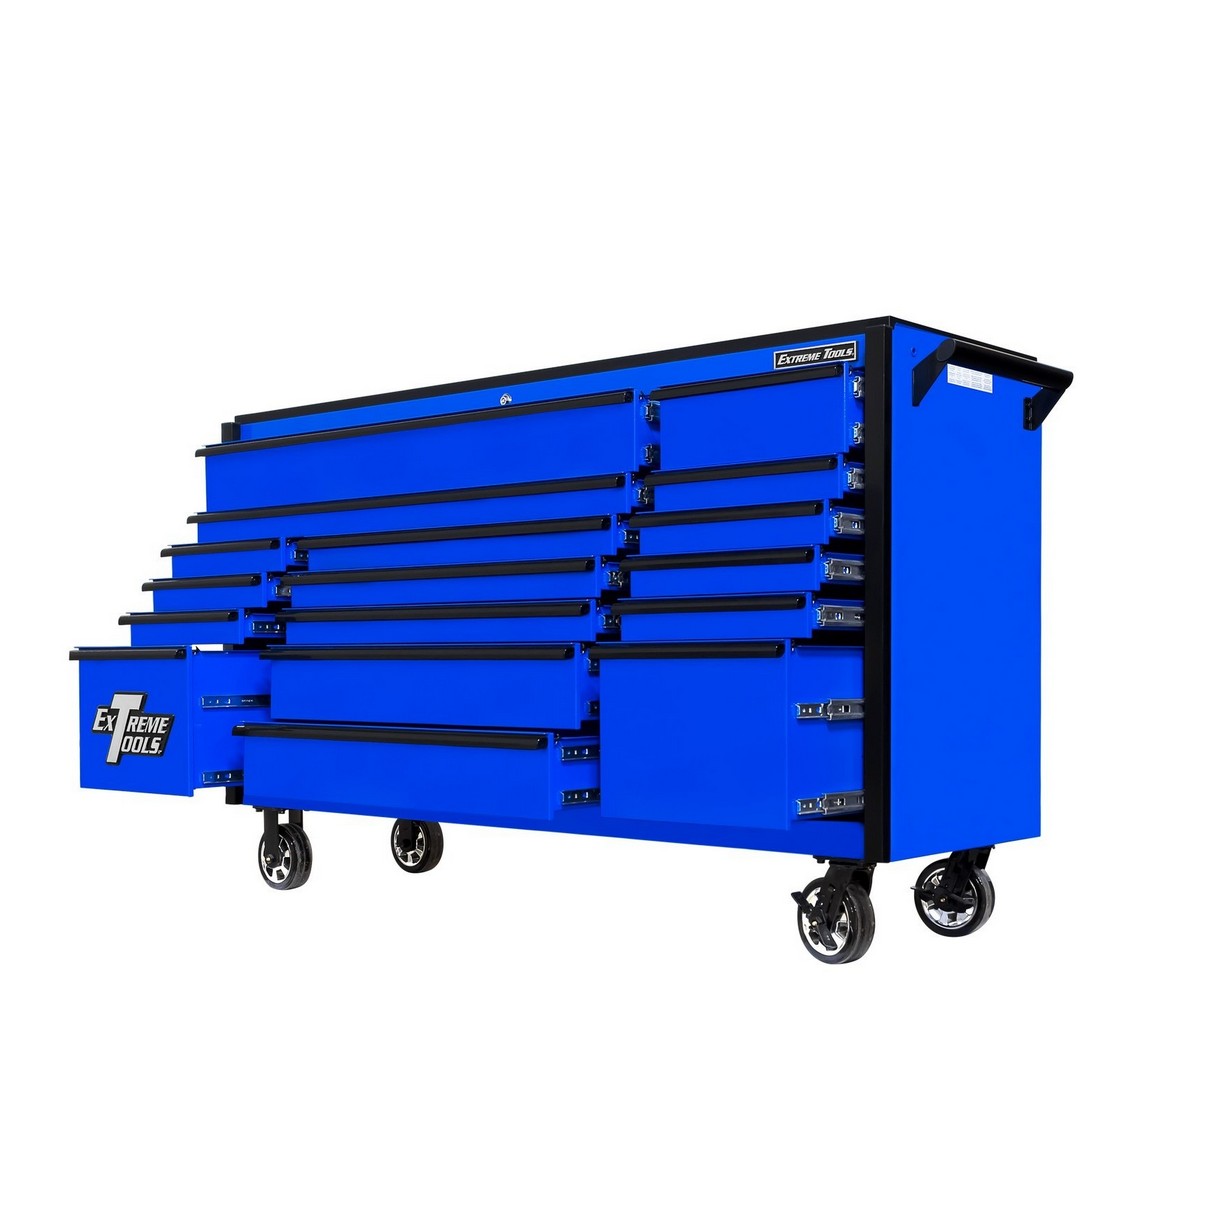 72 Inch 17 Drawer Roller Cabinet, DX Series by Extreme Tools®